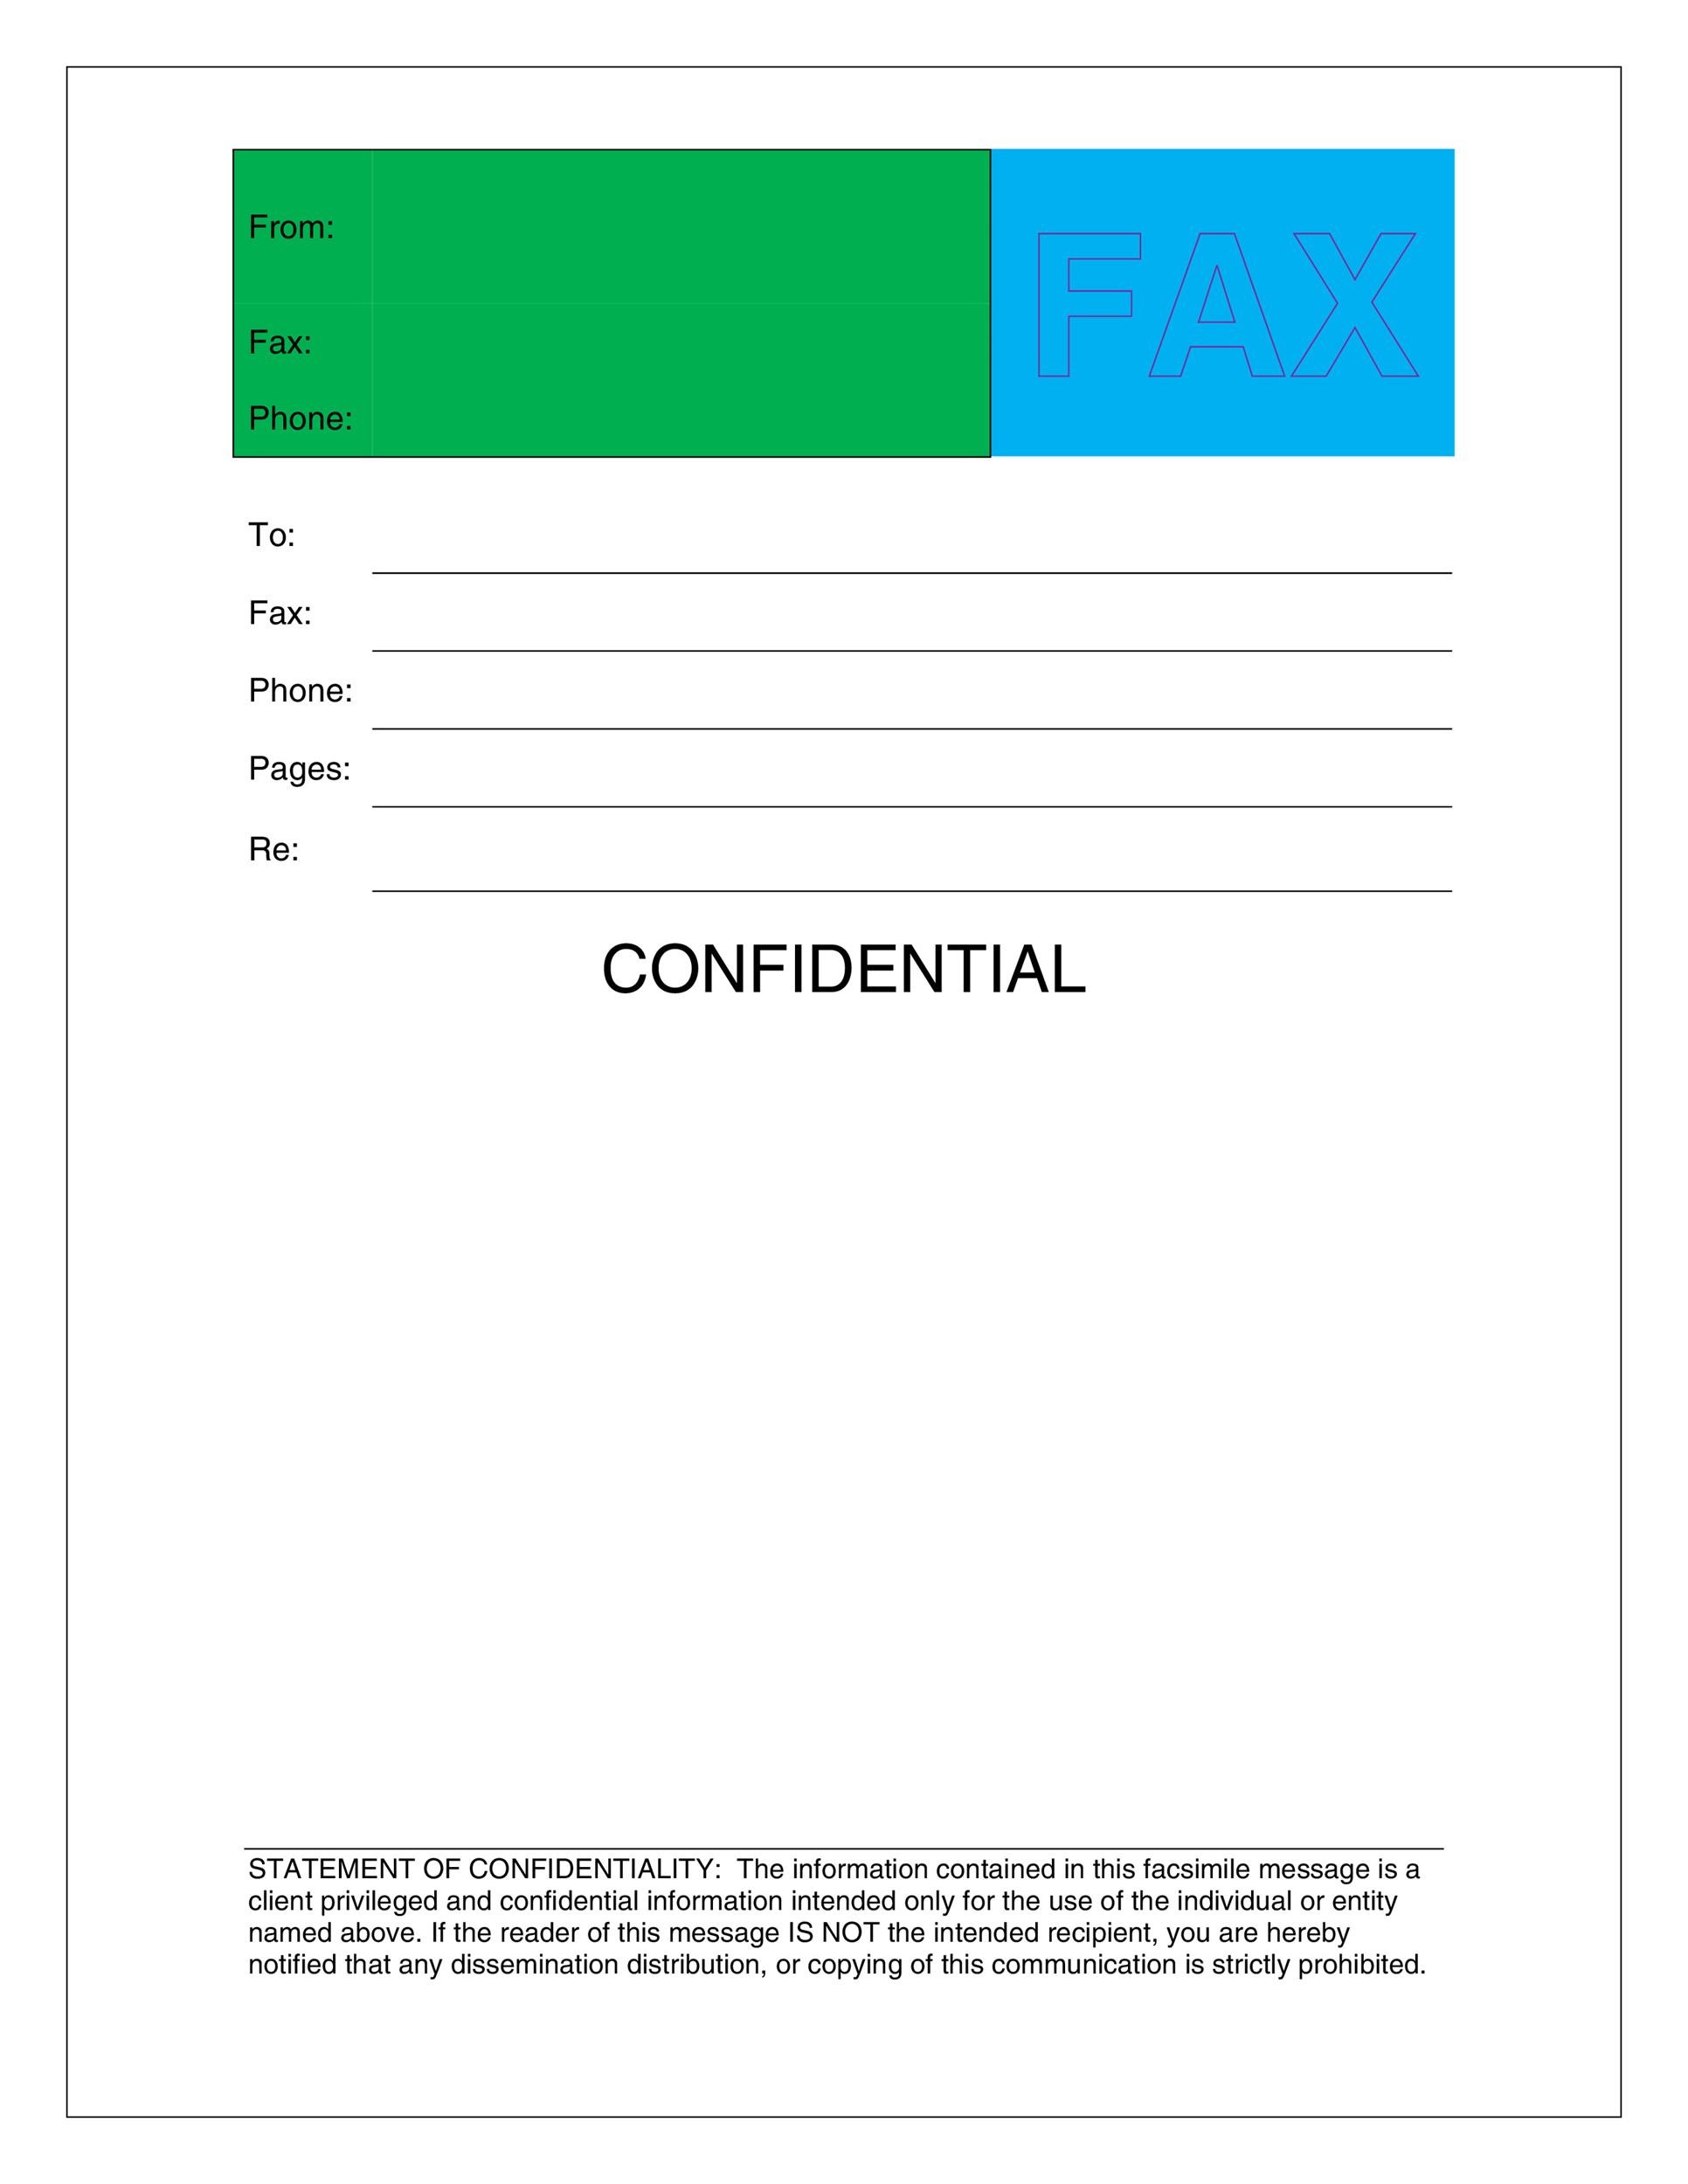 10 Printable Fax Cover Sheet Templates TemplateLab